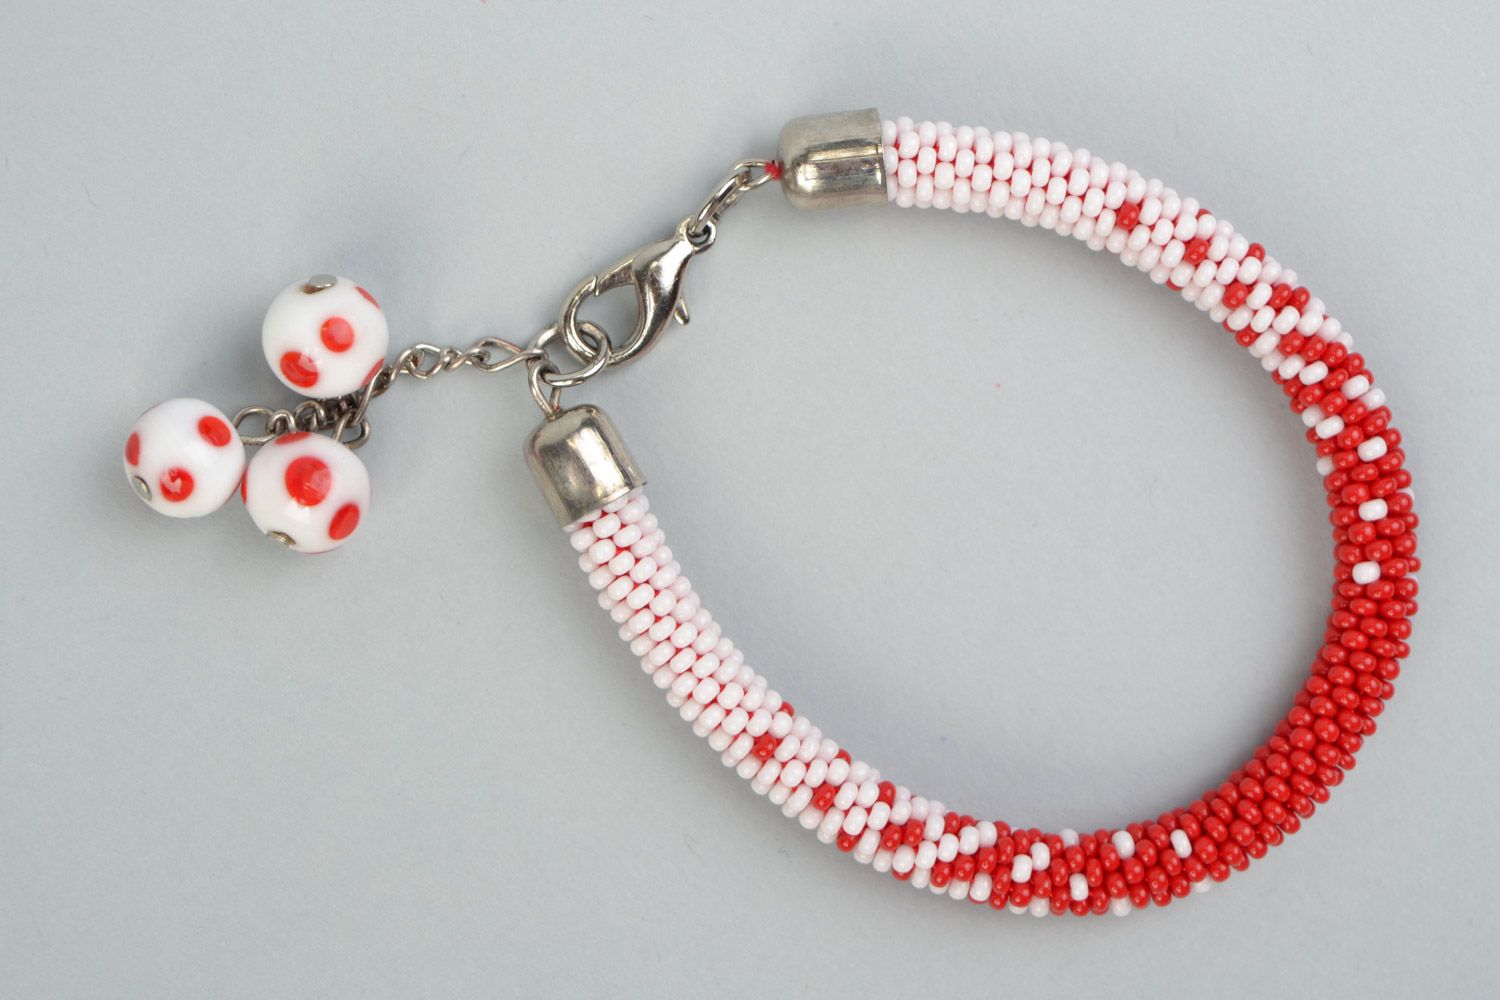 Handmade festive white and red beaded wrist bracelet with charms for women photo 2